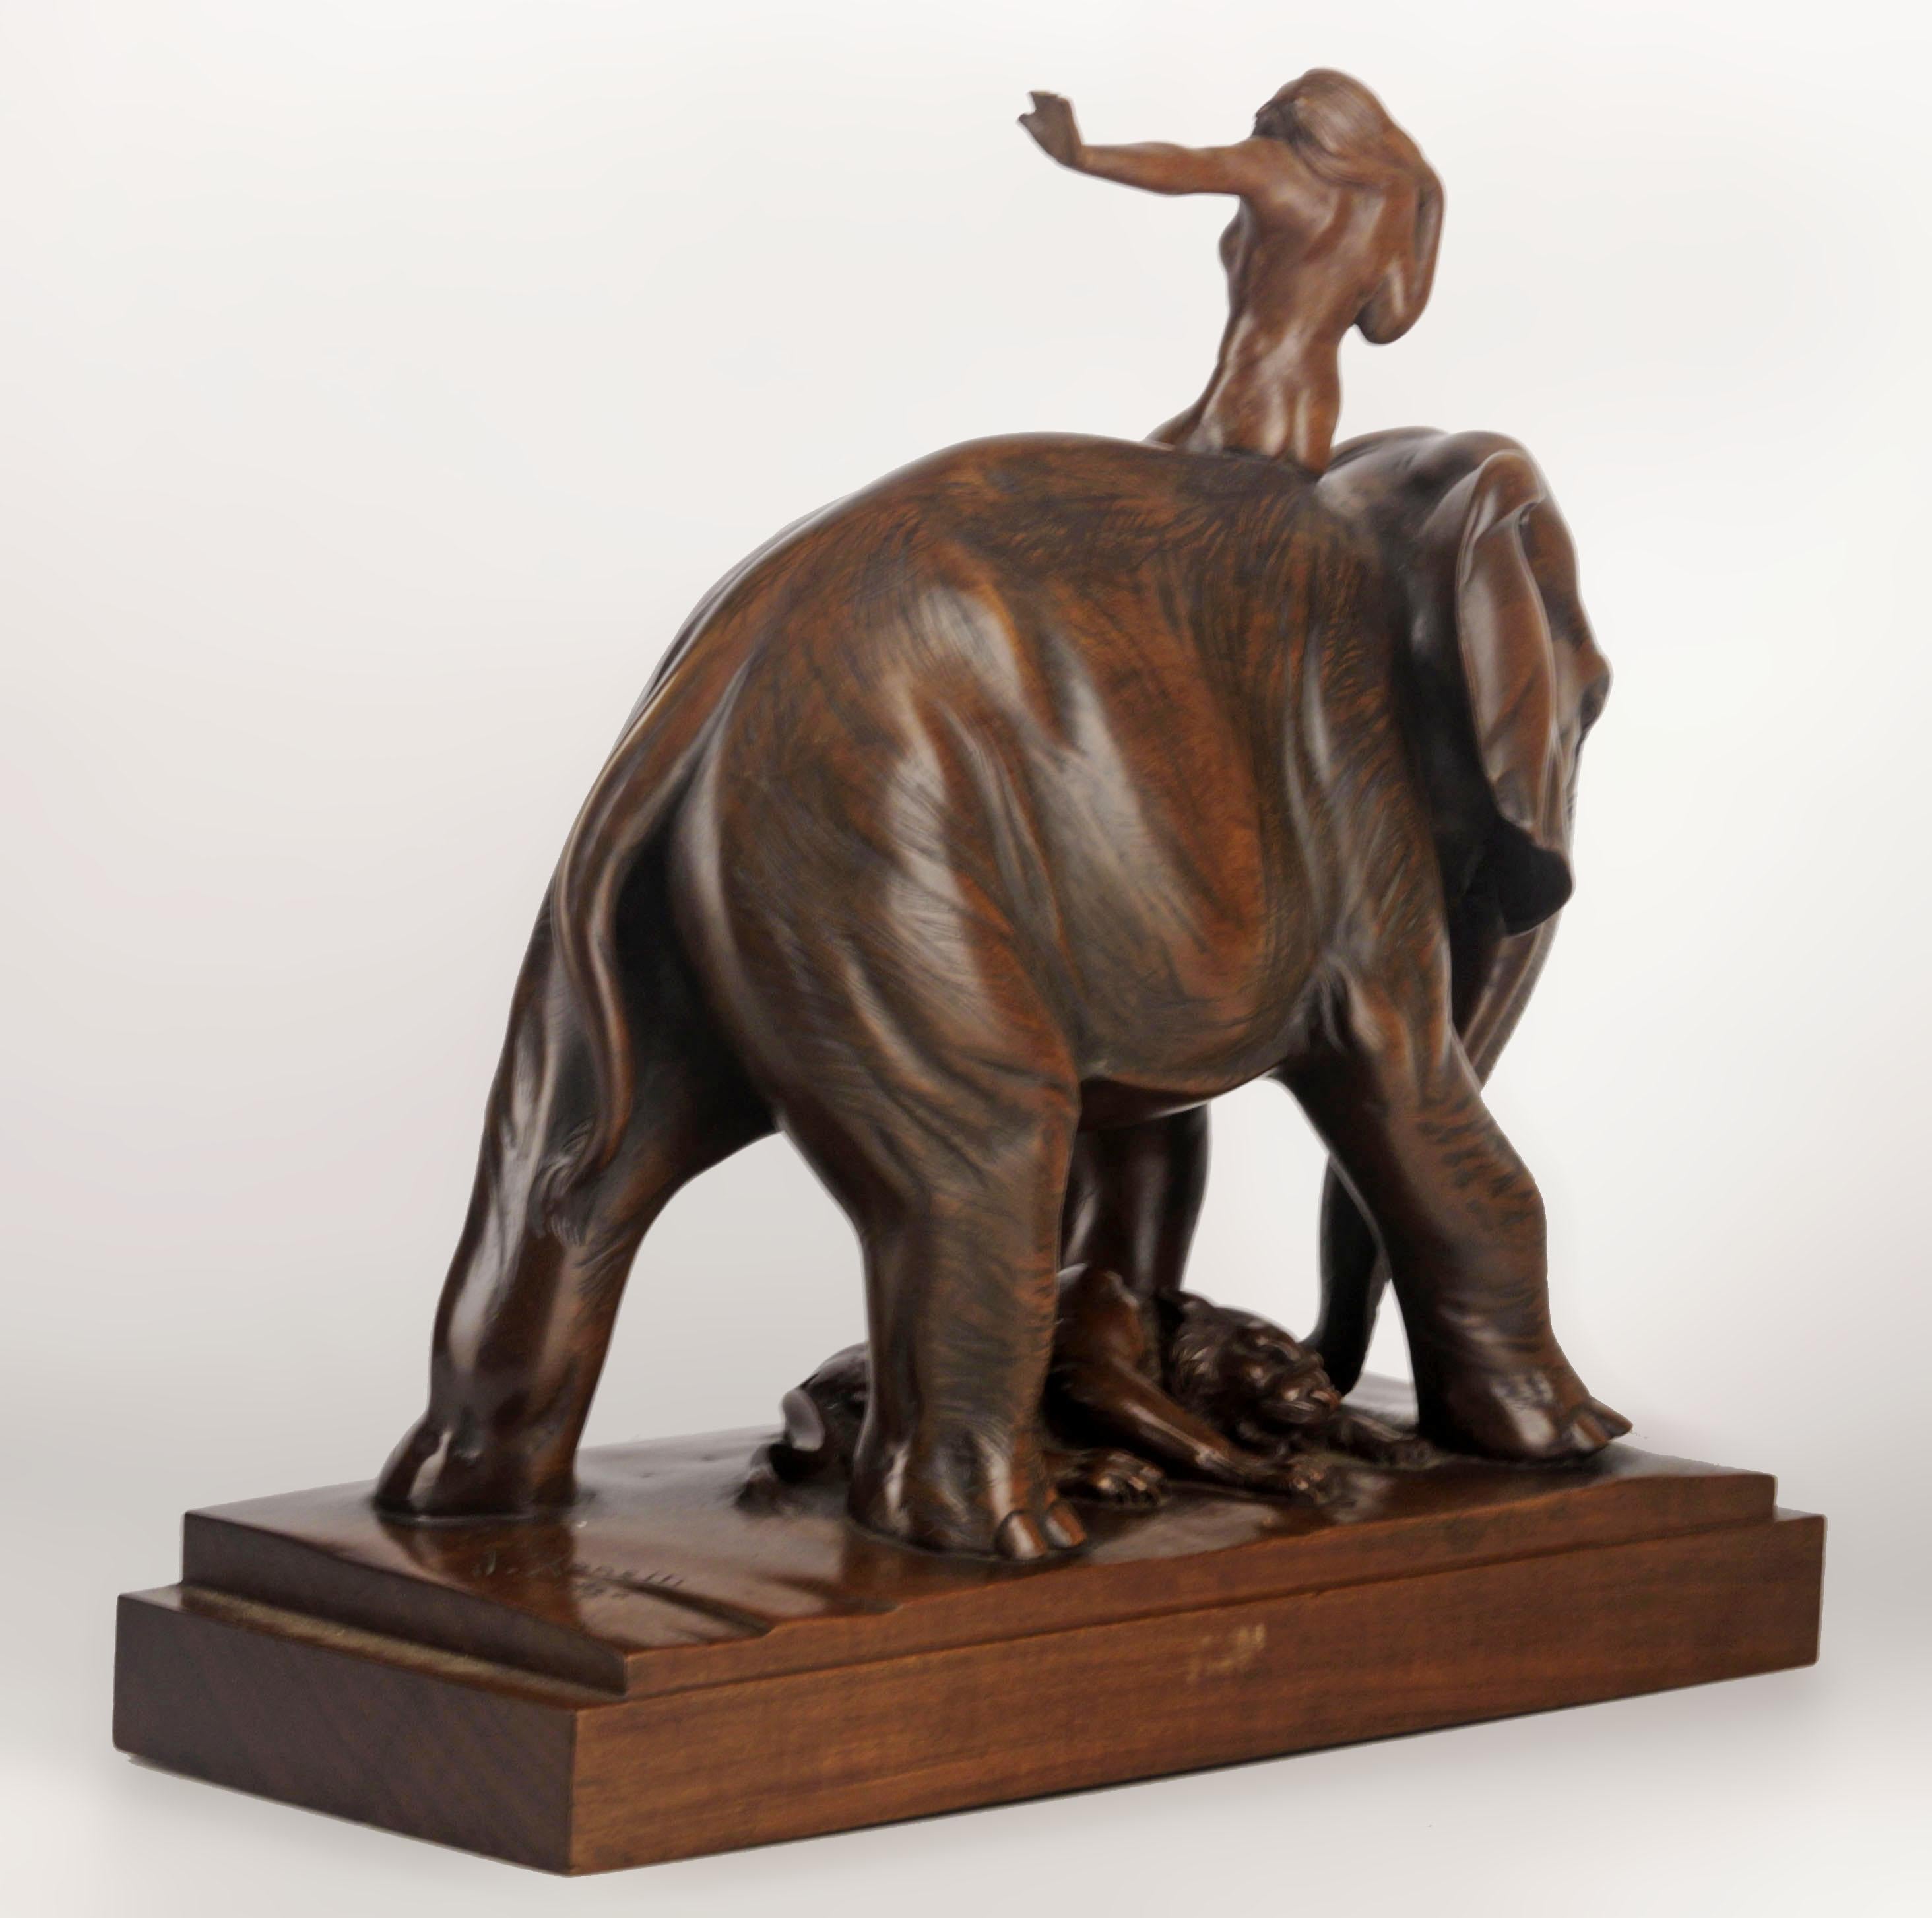 South African African Elephant, Tiger and Woman Rider Varnished Wood Sculpture by J. Zanetti For Sale